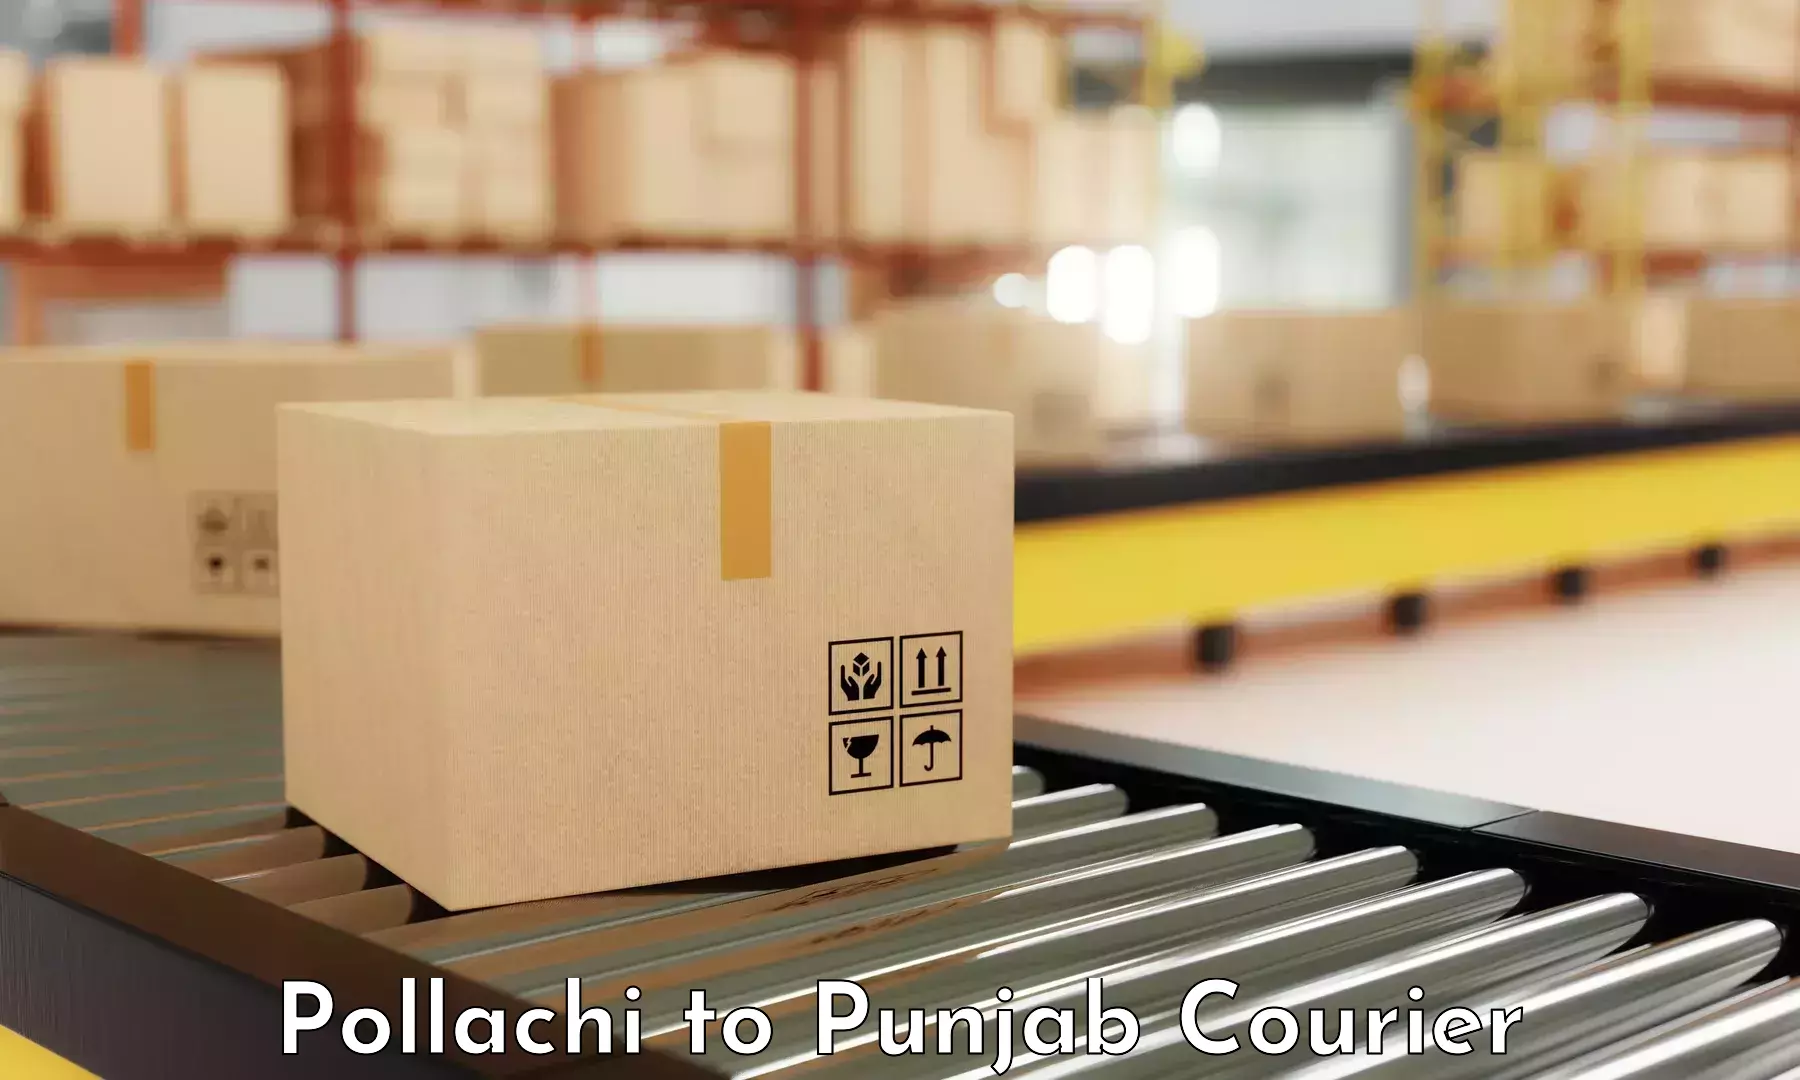 Nationwide delivery network Pollachi to Patran